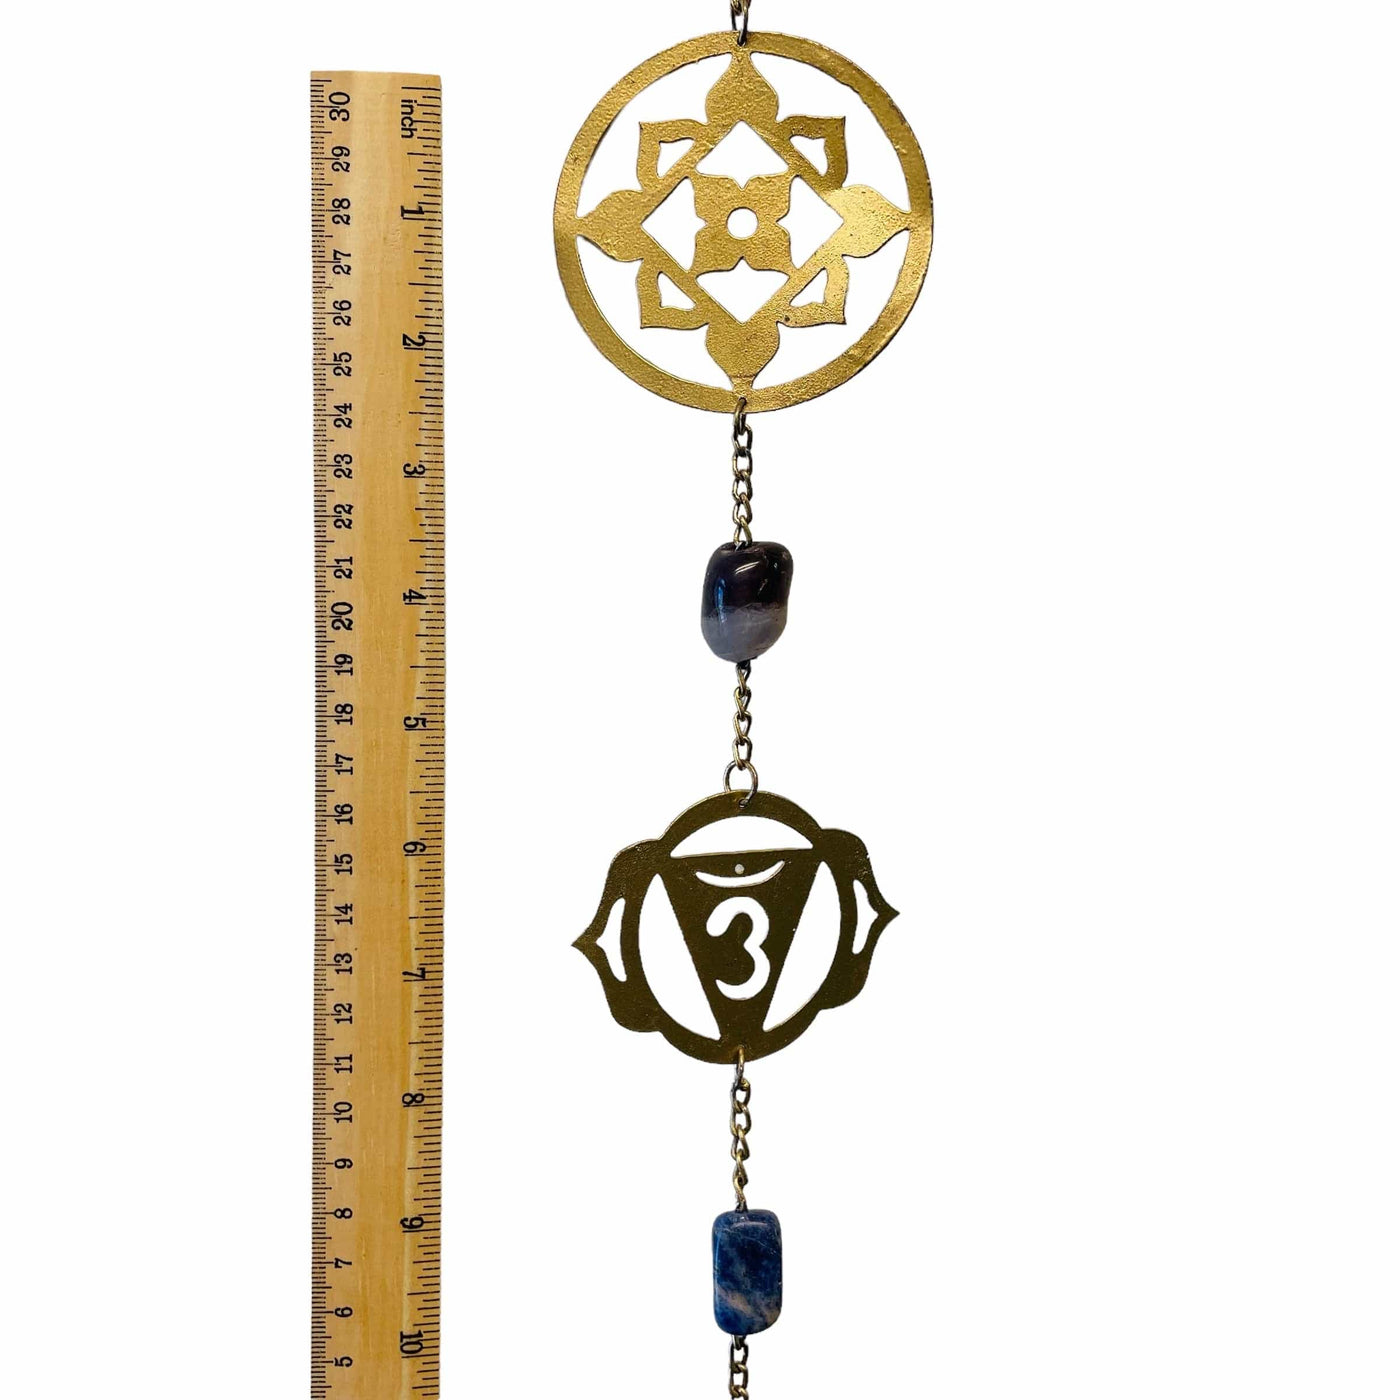 chakra symbols next to a ruler for size reference 